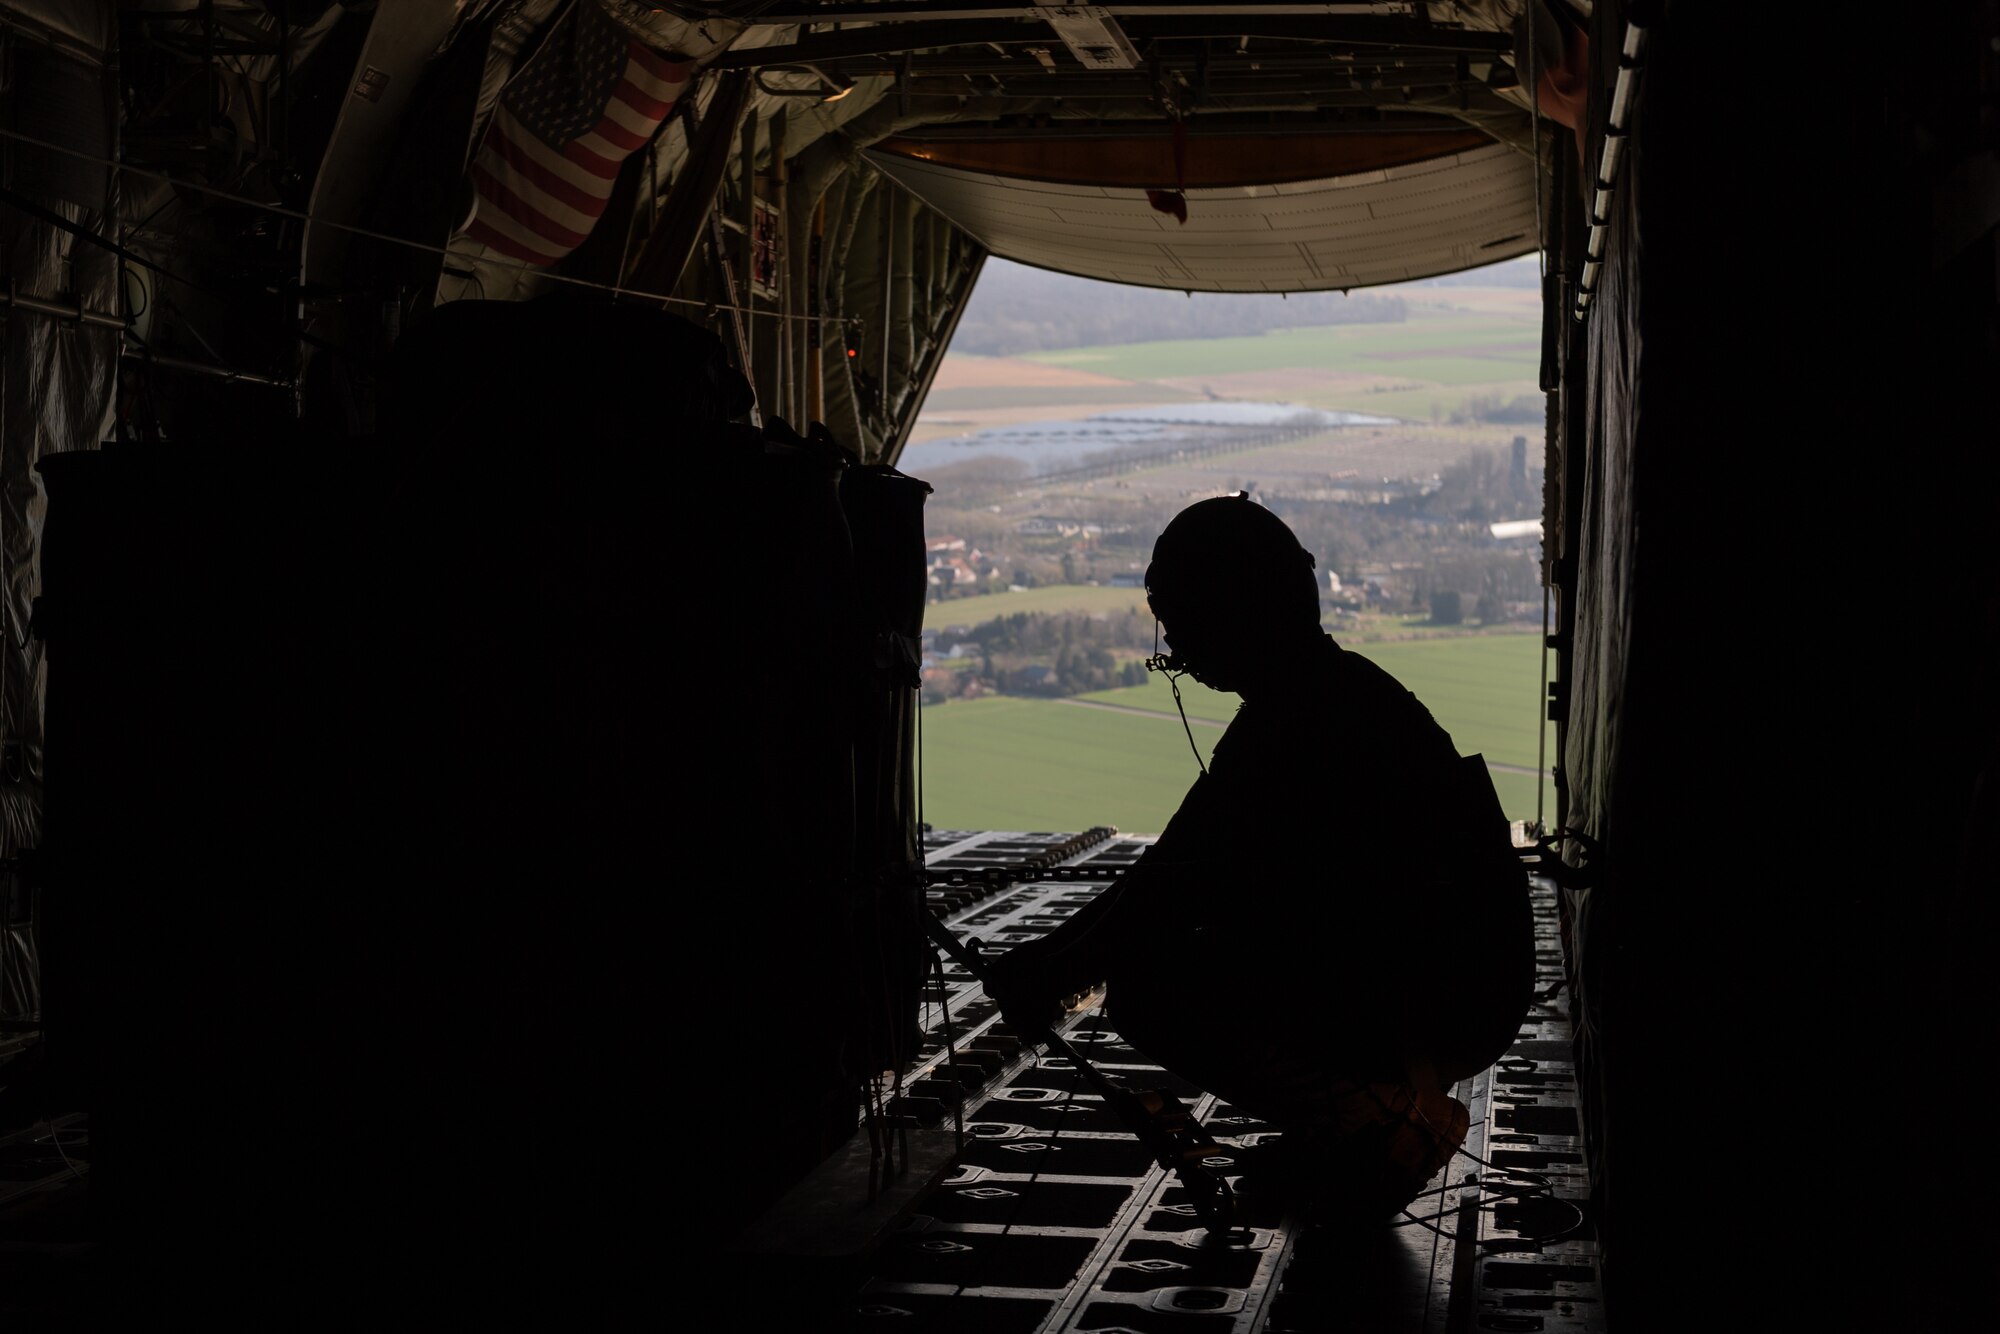 Silhouette of Airman kneeling on an aircraft.